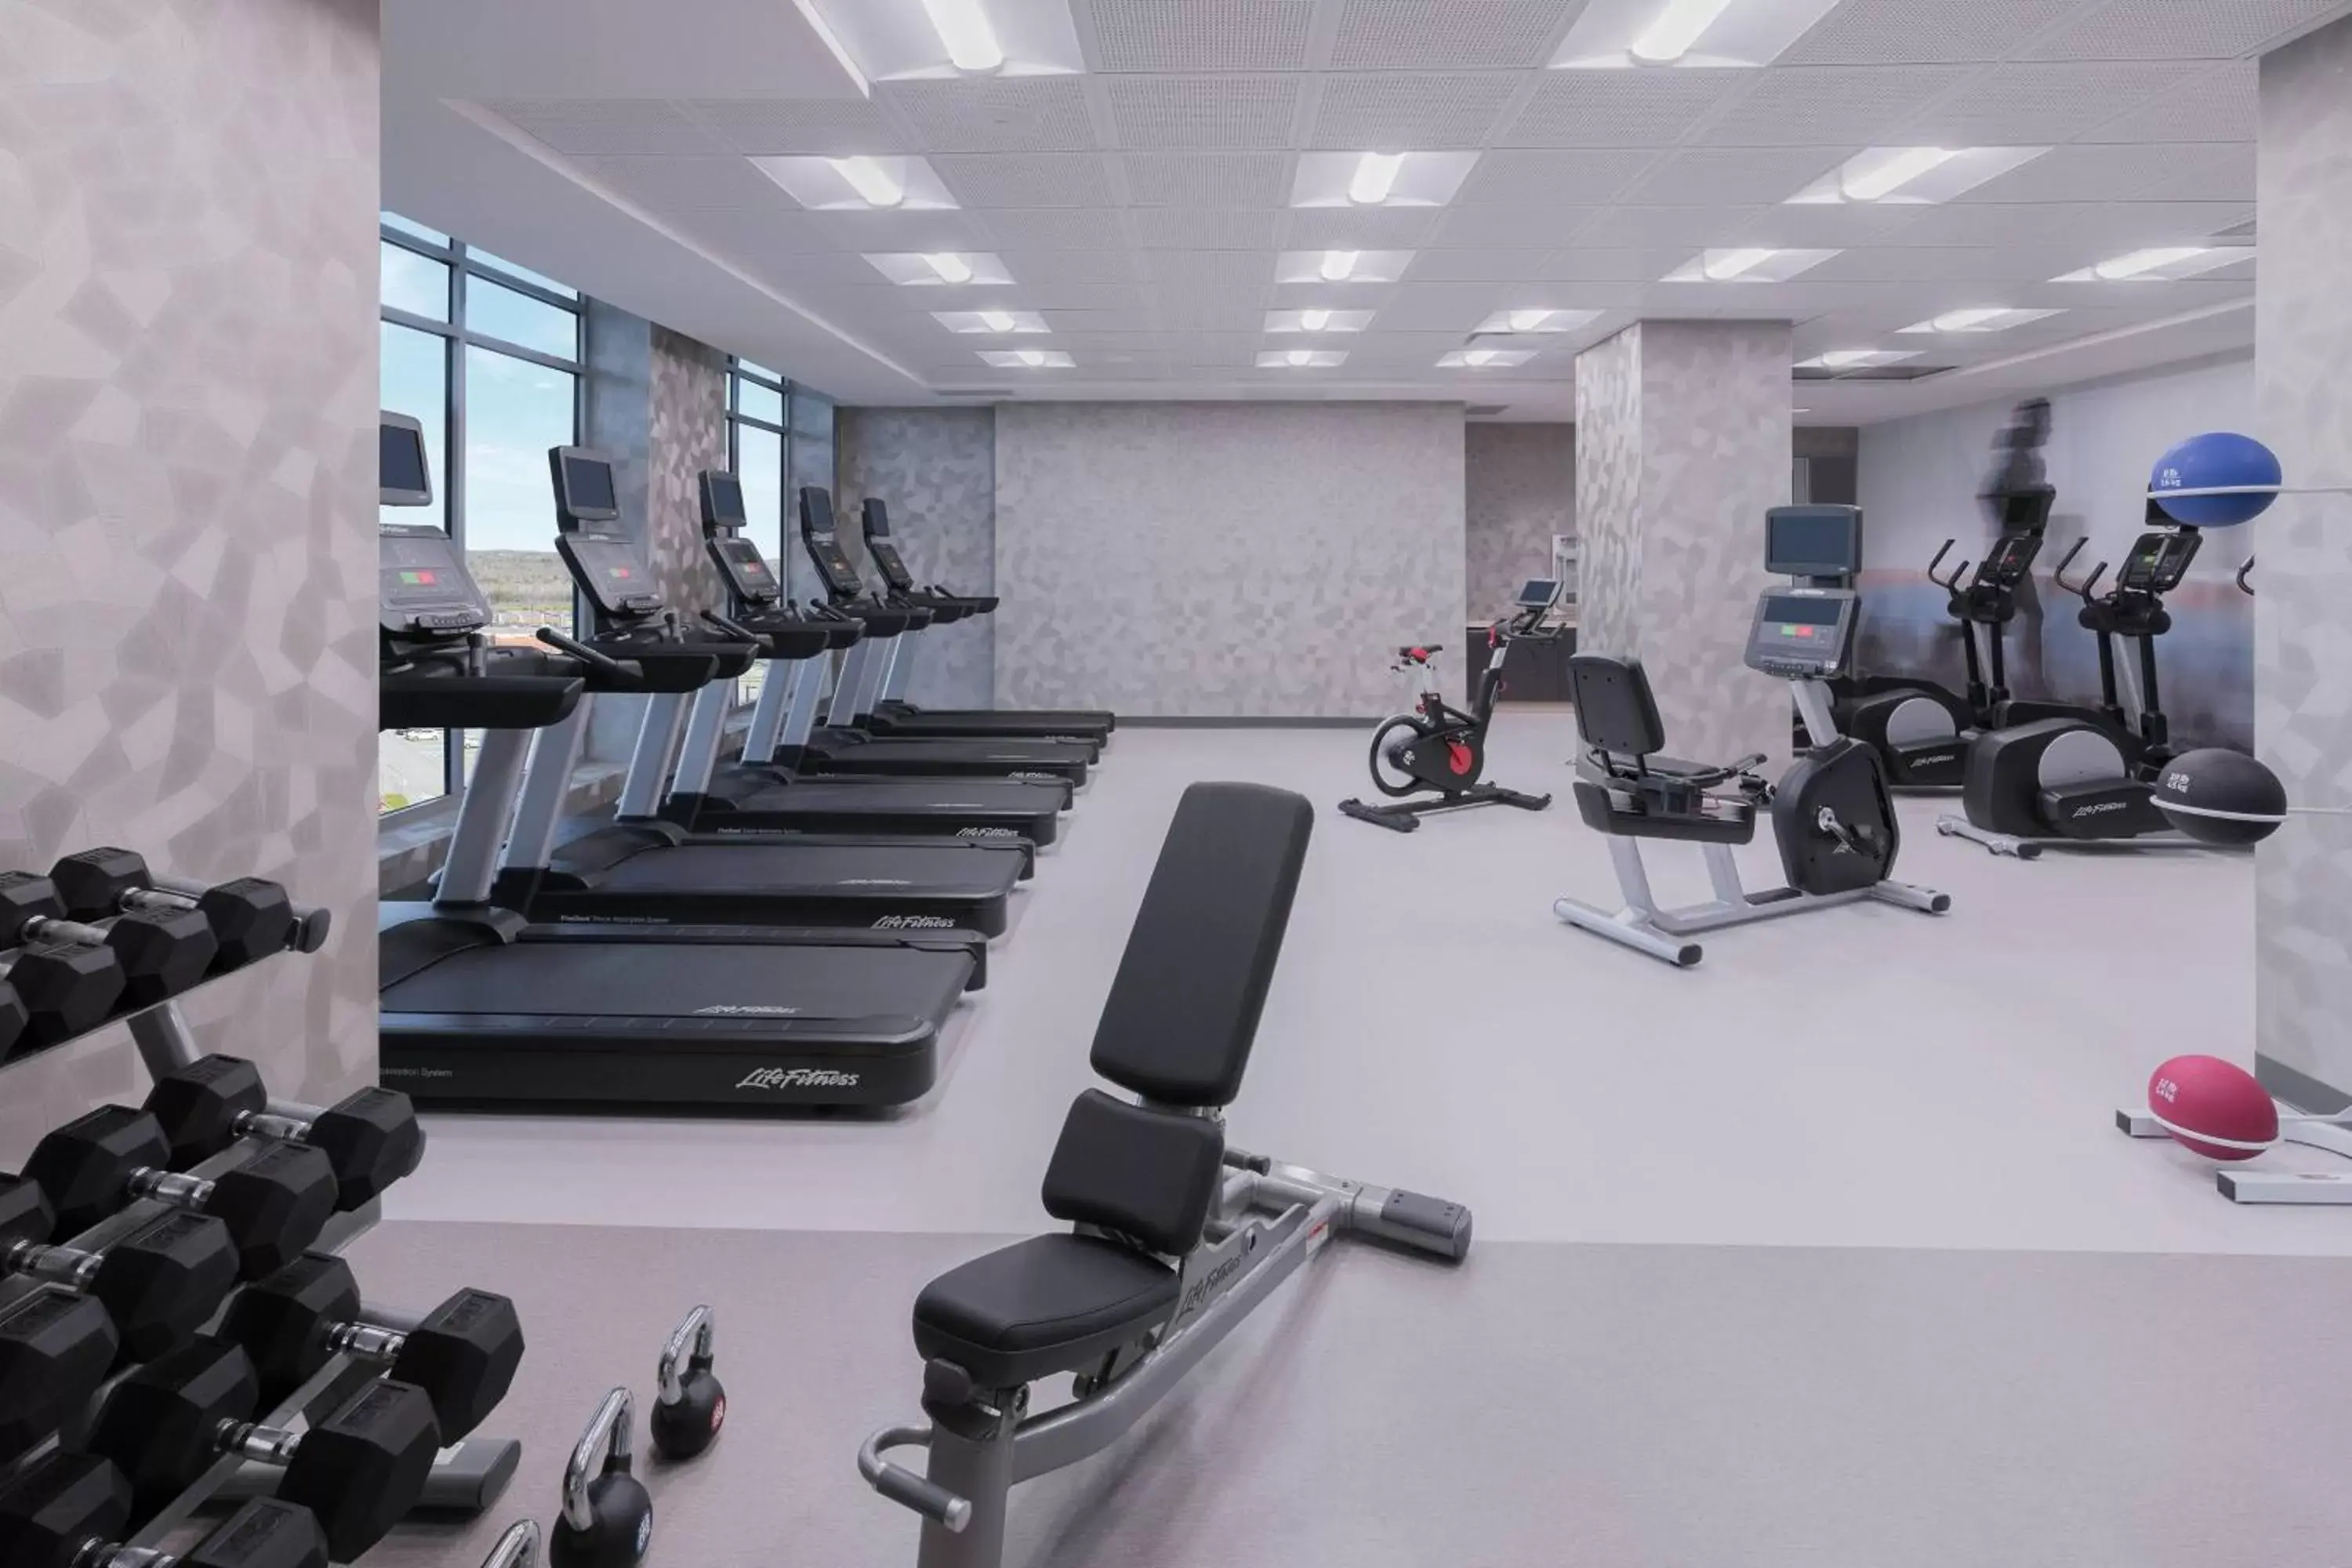 Fitness centre/facilities, Fitness Center/Facilities in Courtyard by Marriott Halifax Dartmouth